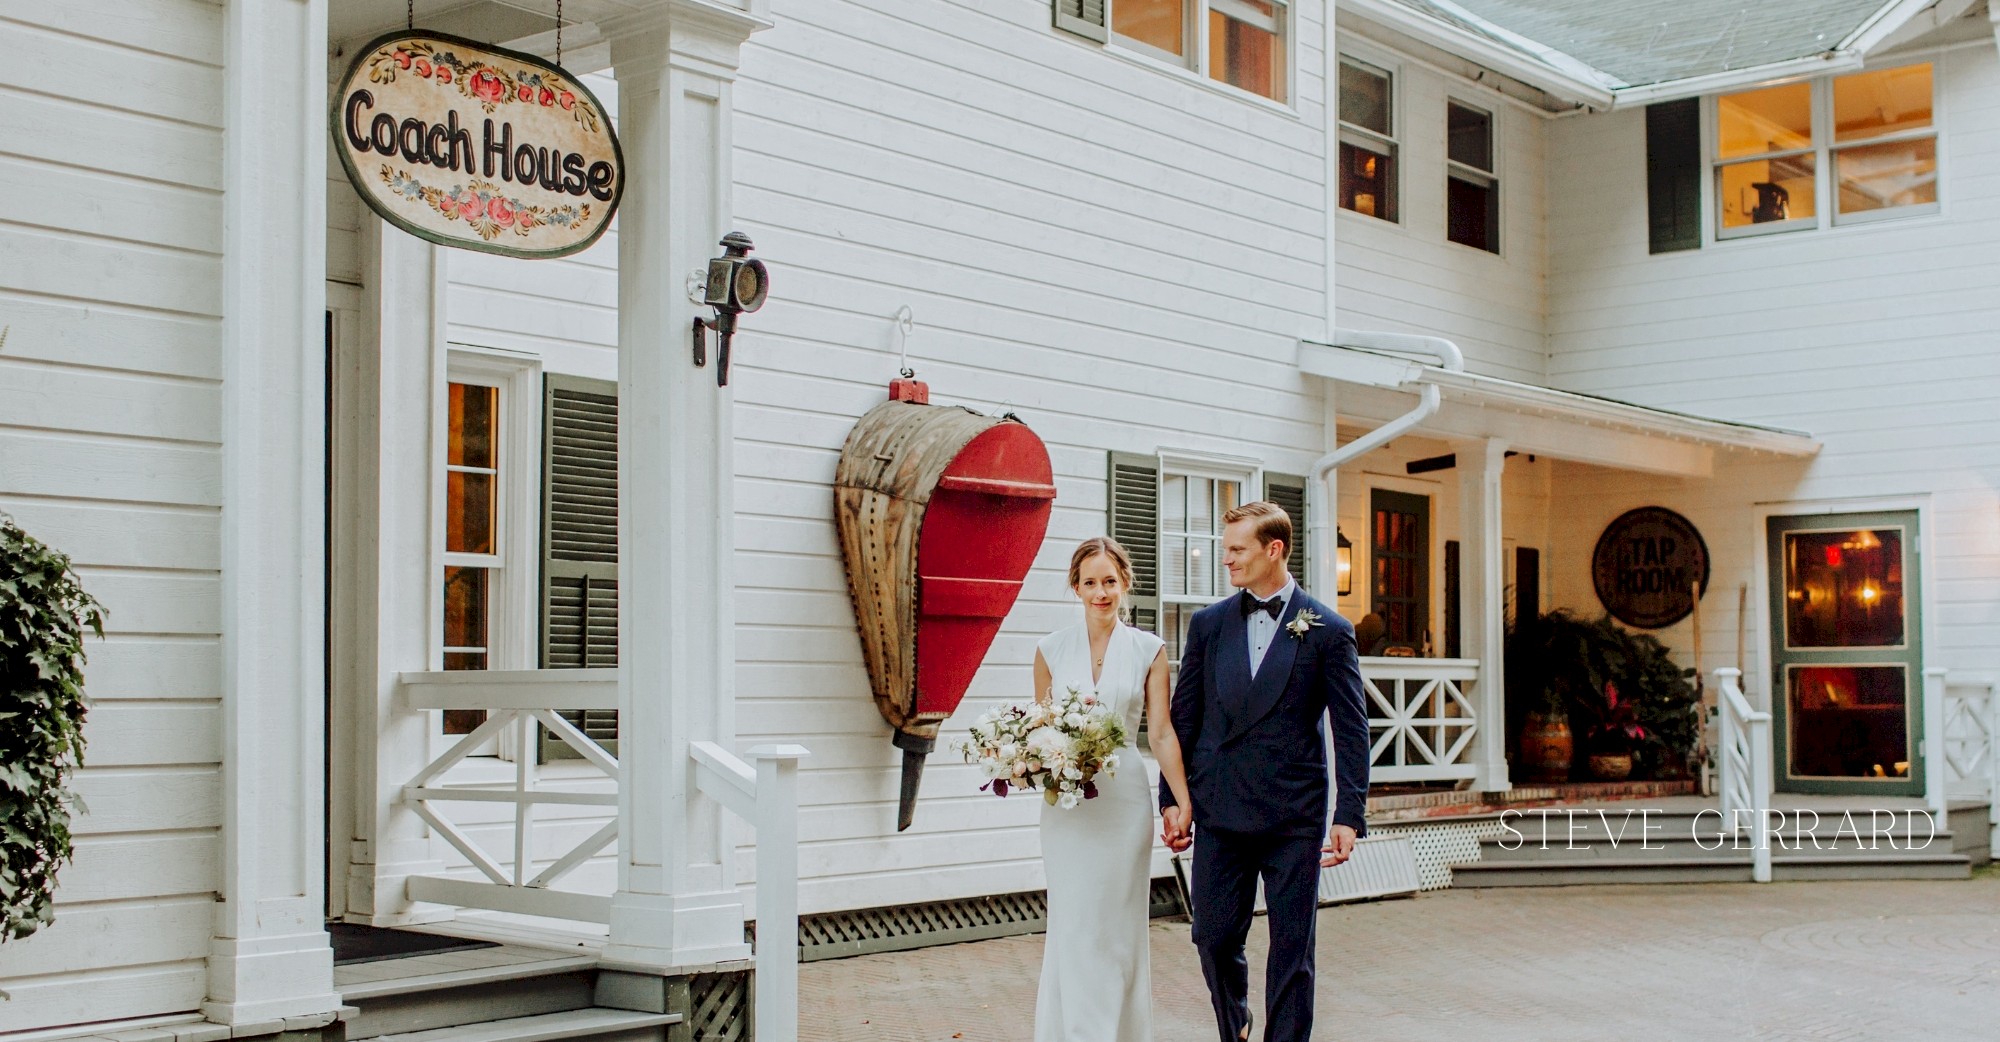 Groom and bride walking in front of the Coach House